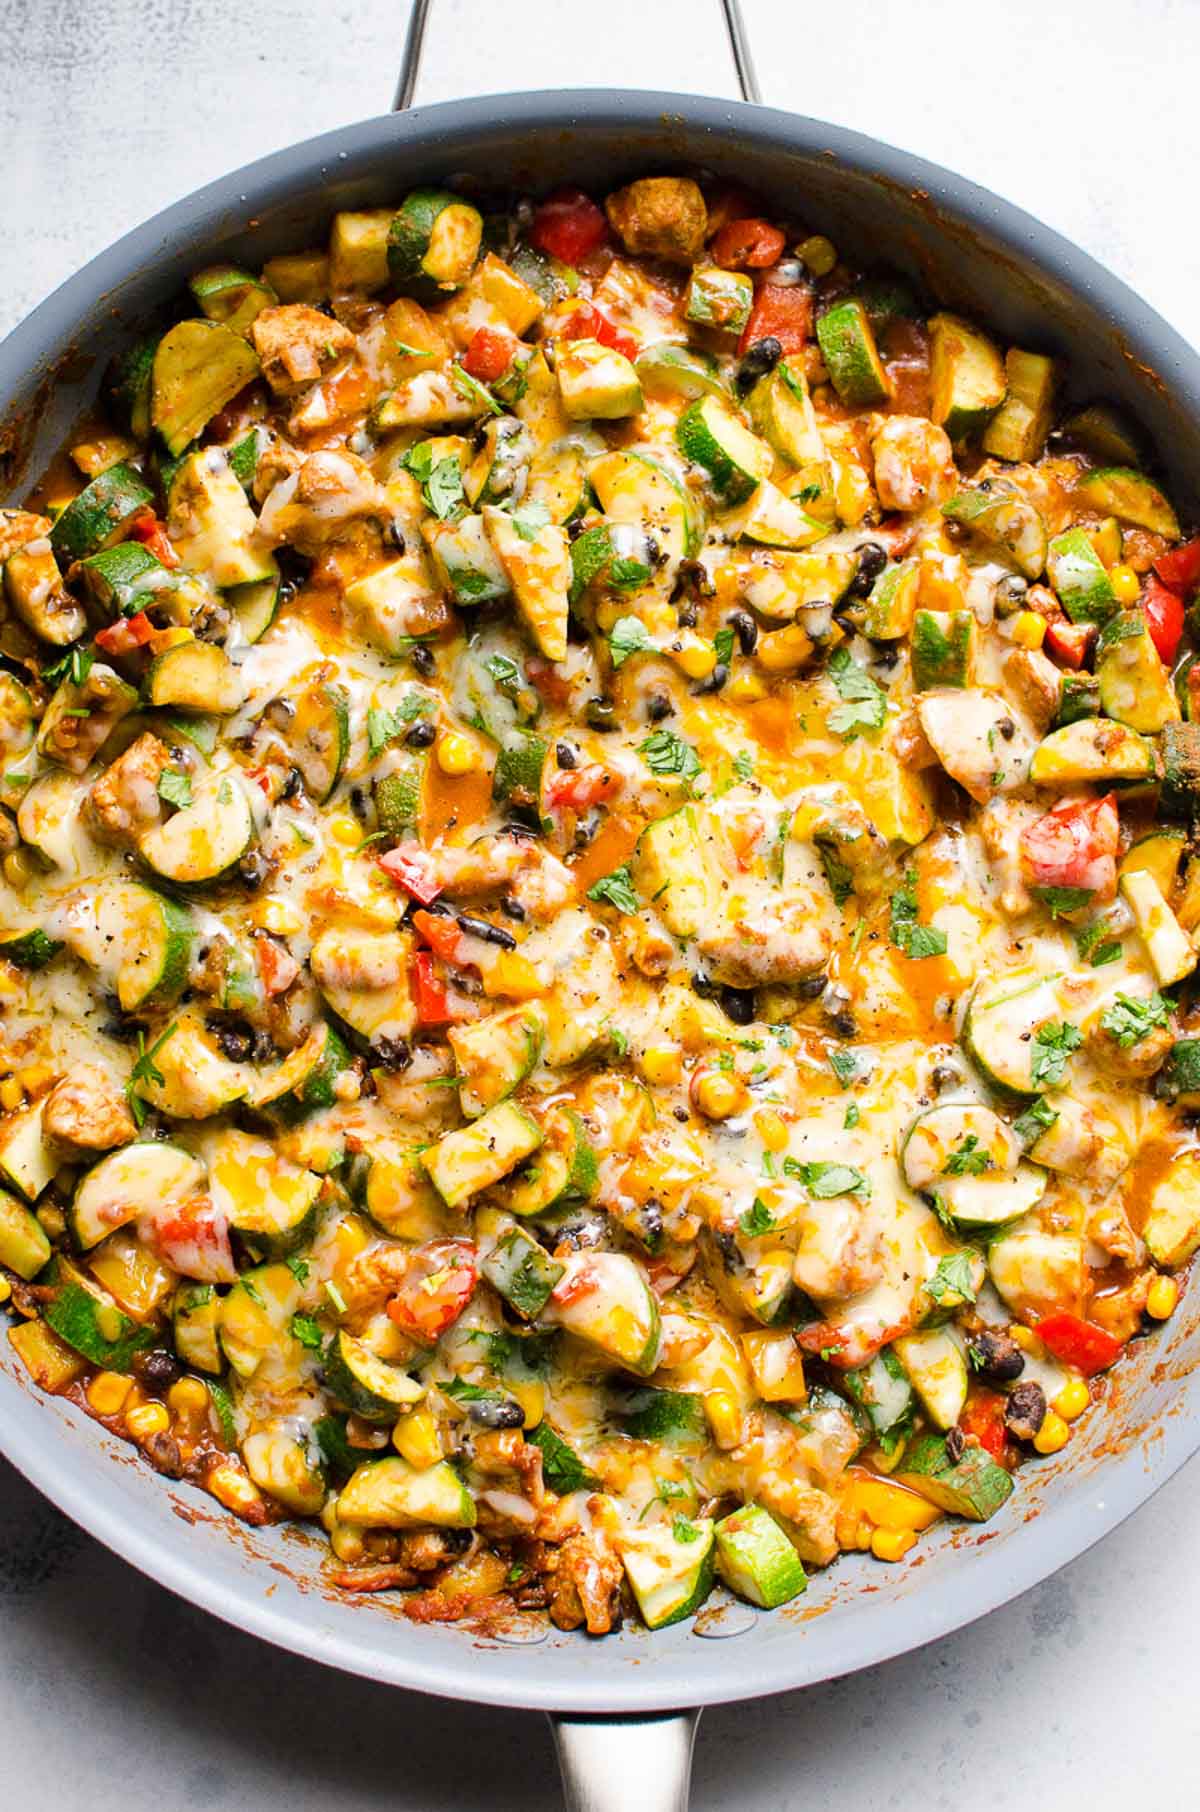 25 Easy Healthy Dinner Recipes  - Tex Mex Chicken and Zucchini﻿